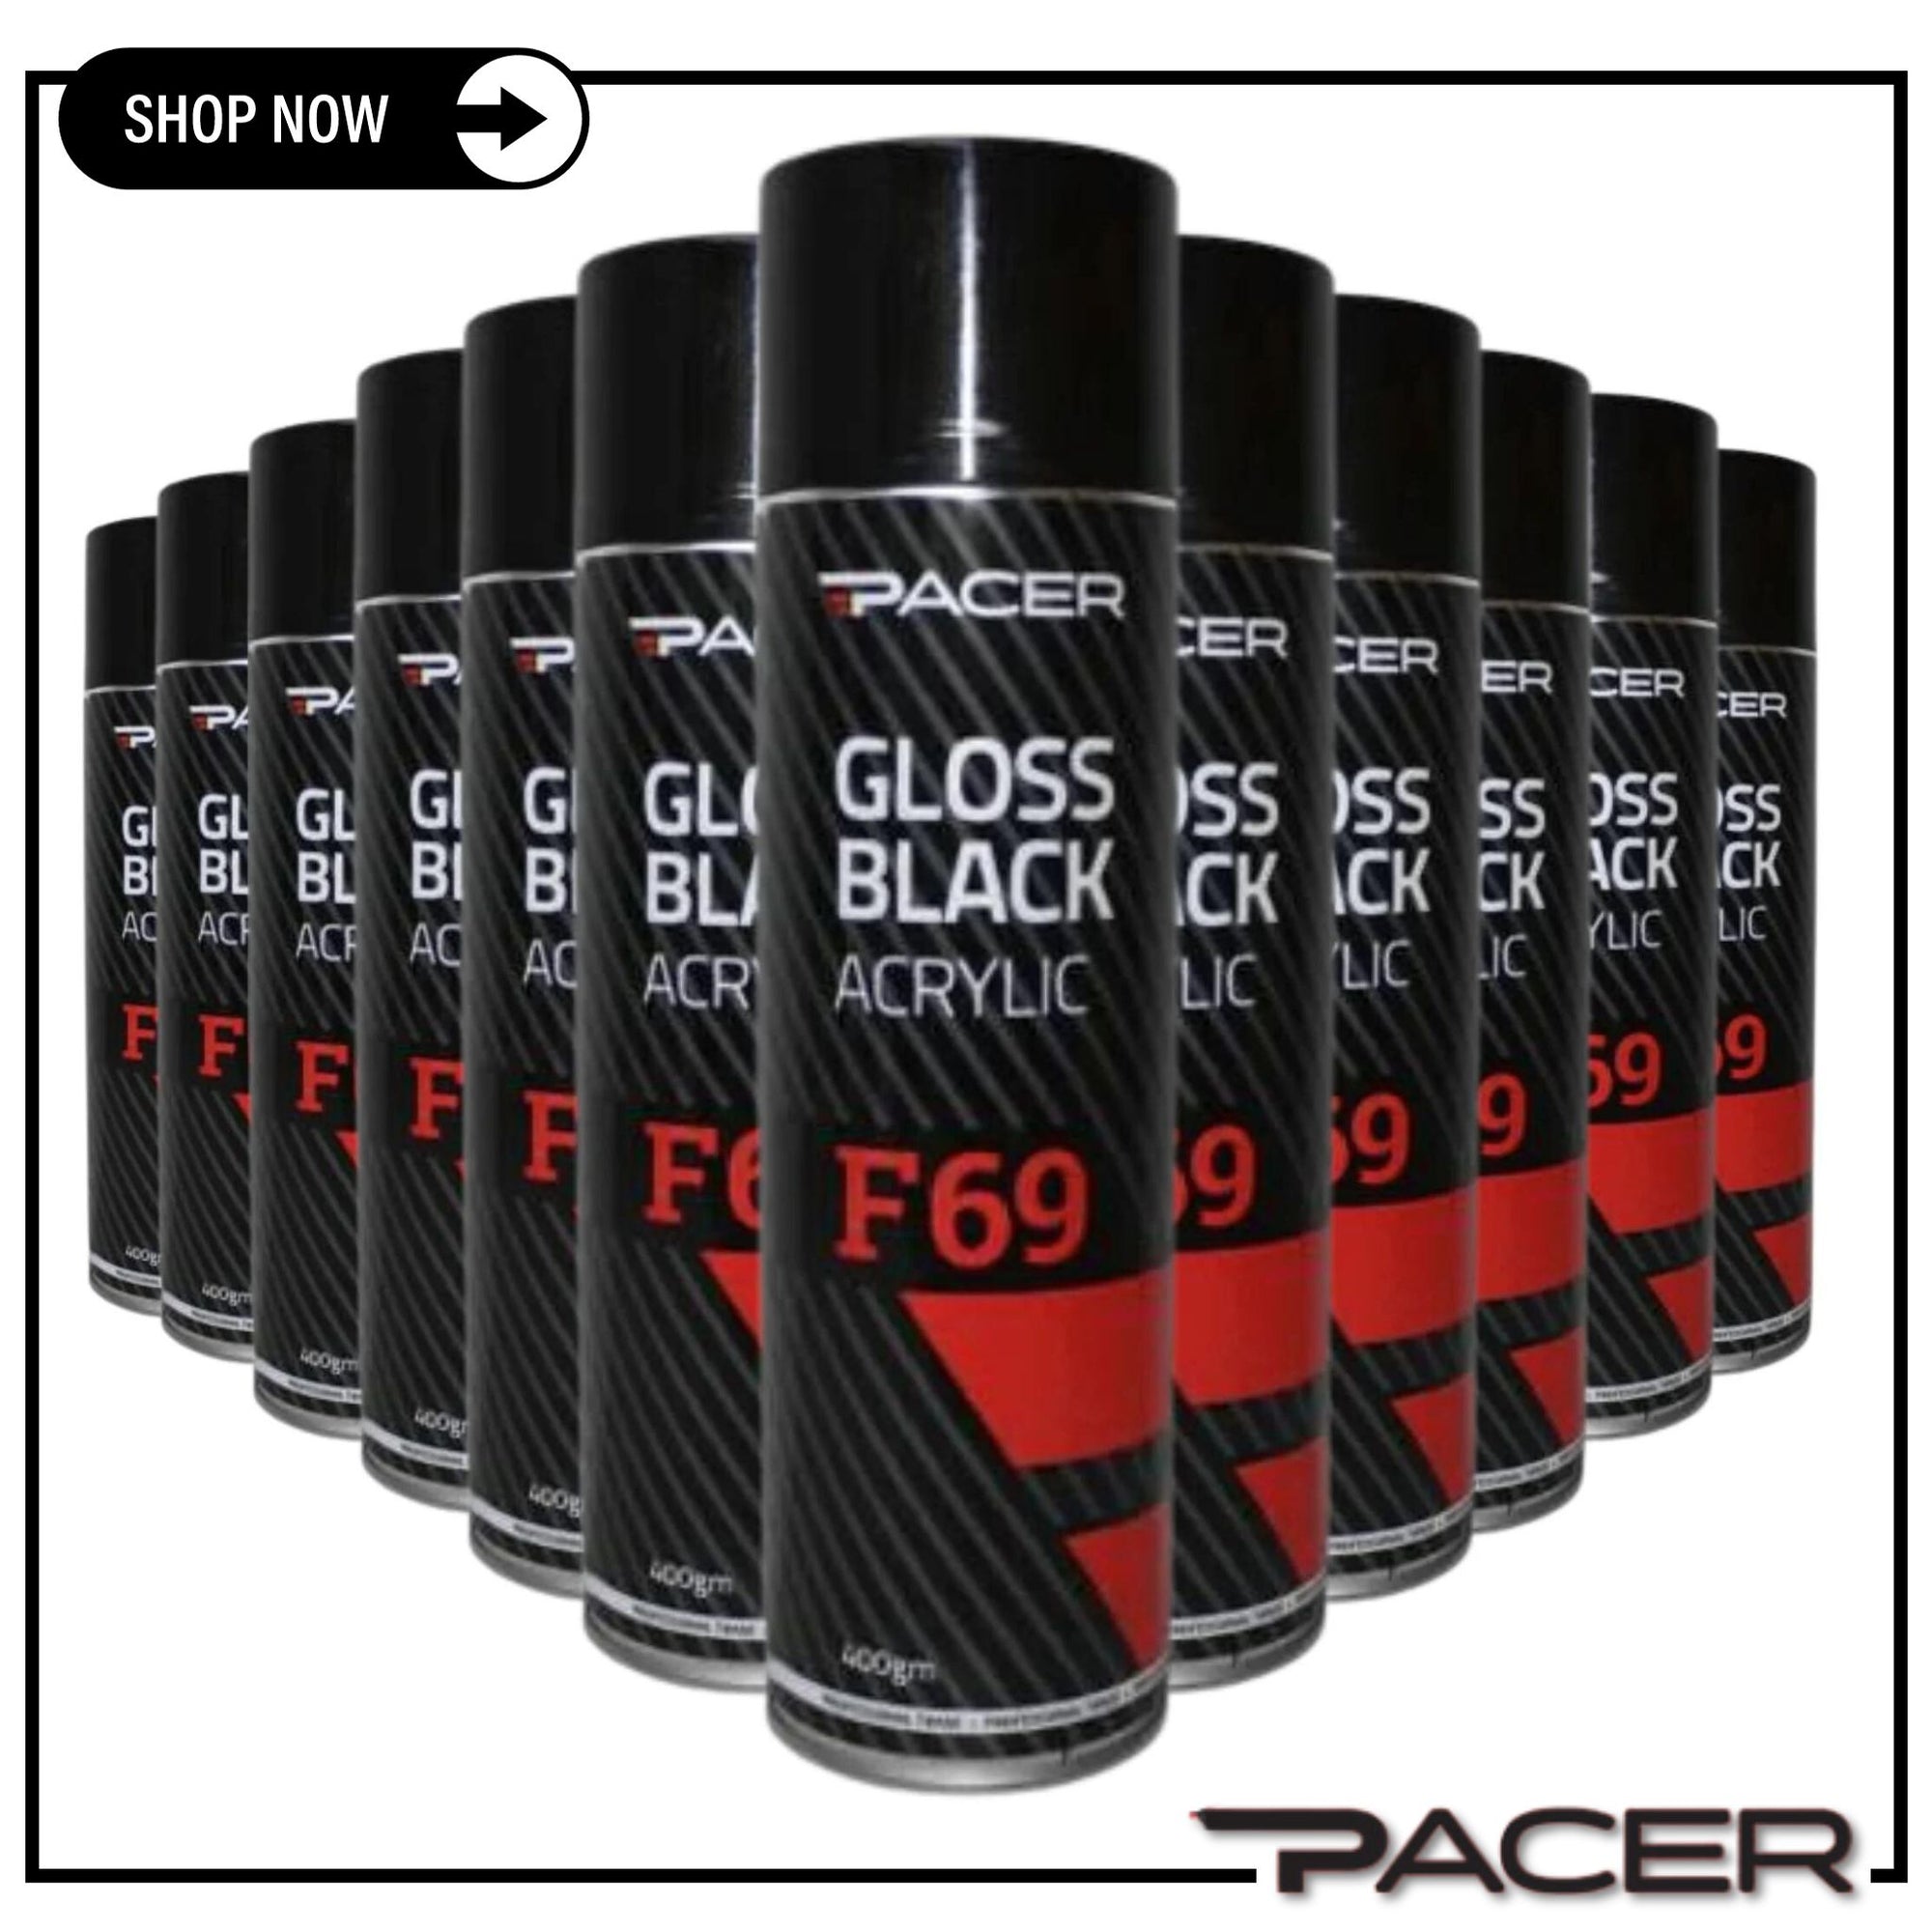 12 CANS | PACER F69 GLOSS BLACK ACRYLIC 400G SPRAY- GB400 - South East Clearance Centre